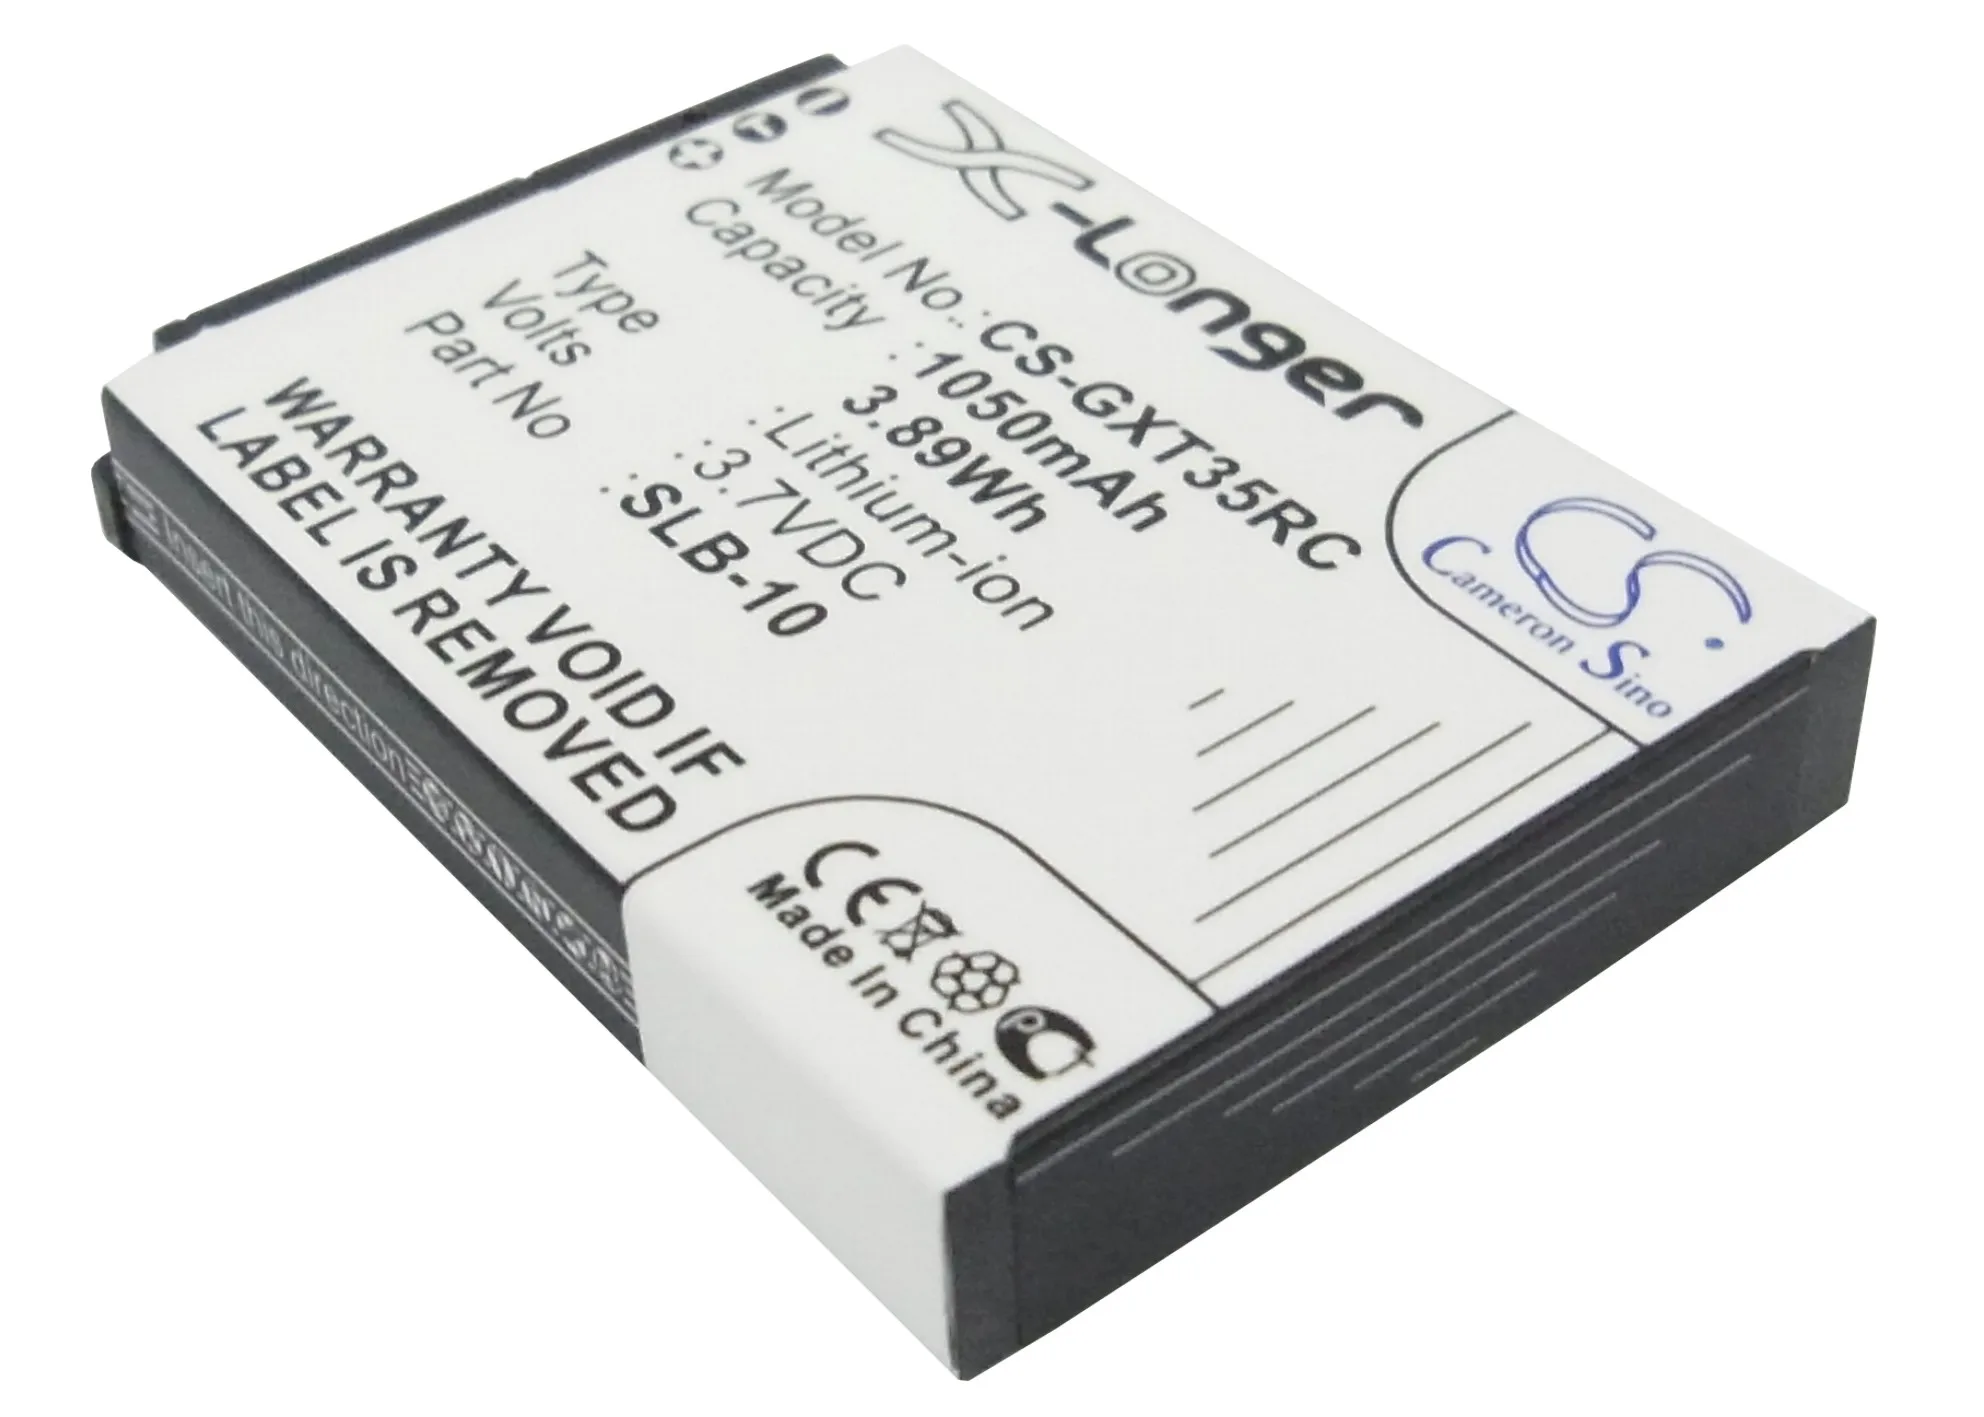 

CS 1050mAh / 3.89Wh battery for Trust GXT 35 Wireless Laser Gaming M, Trust GXT 35 SLB-10